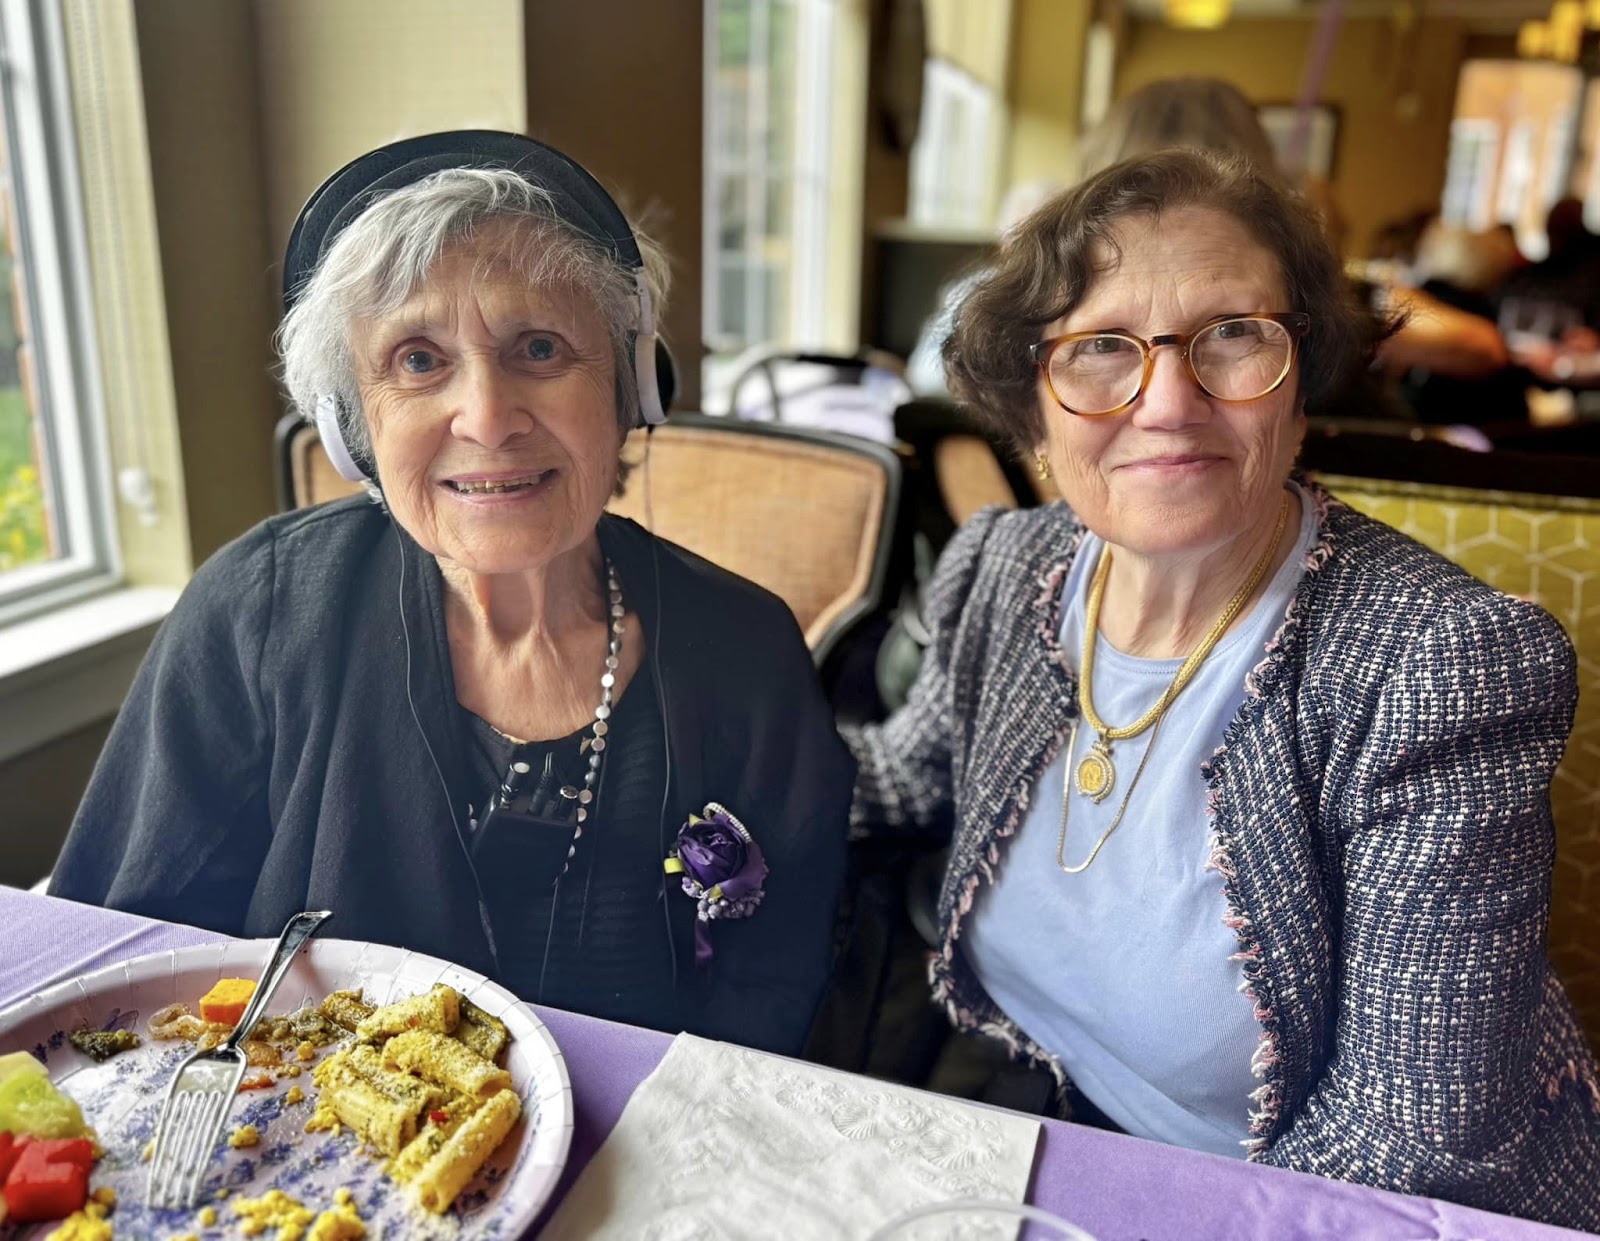 Two women smiling at the camera in an assisted living facility while sitting at a table